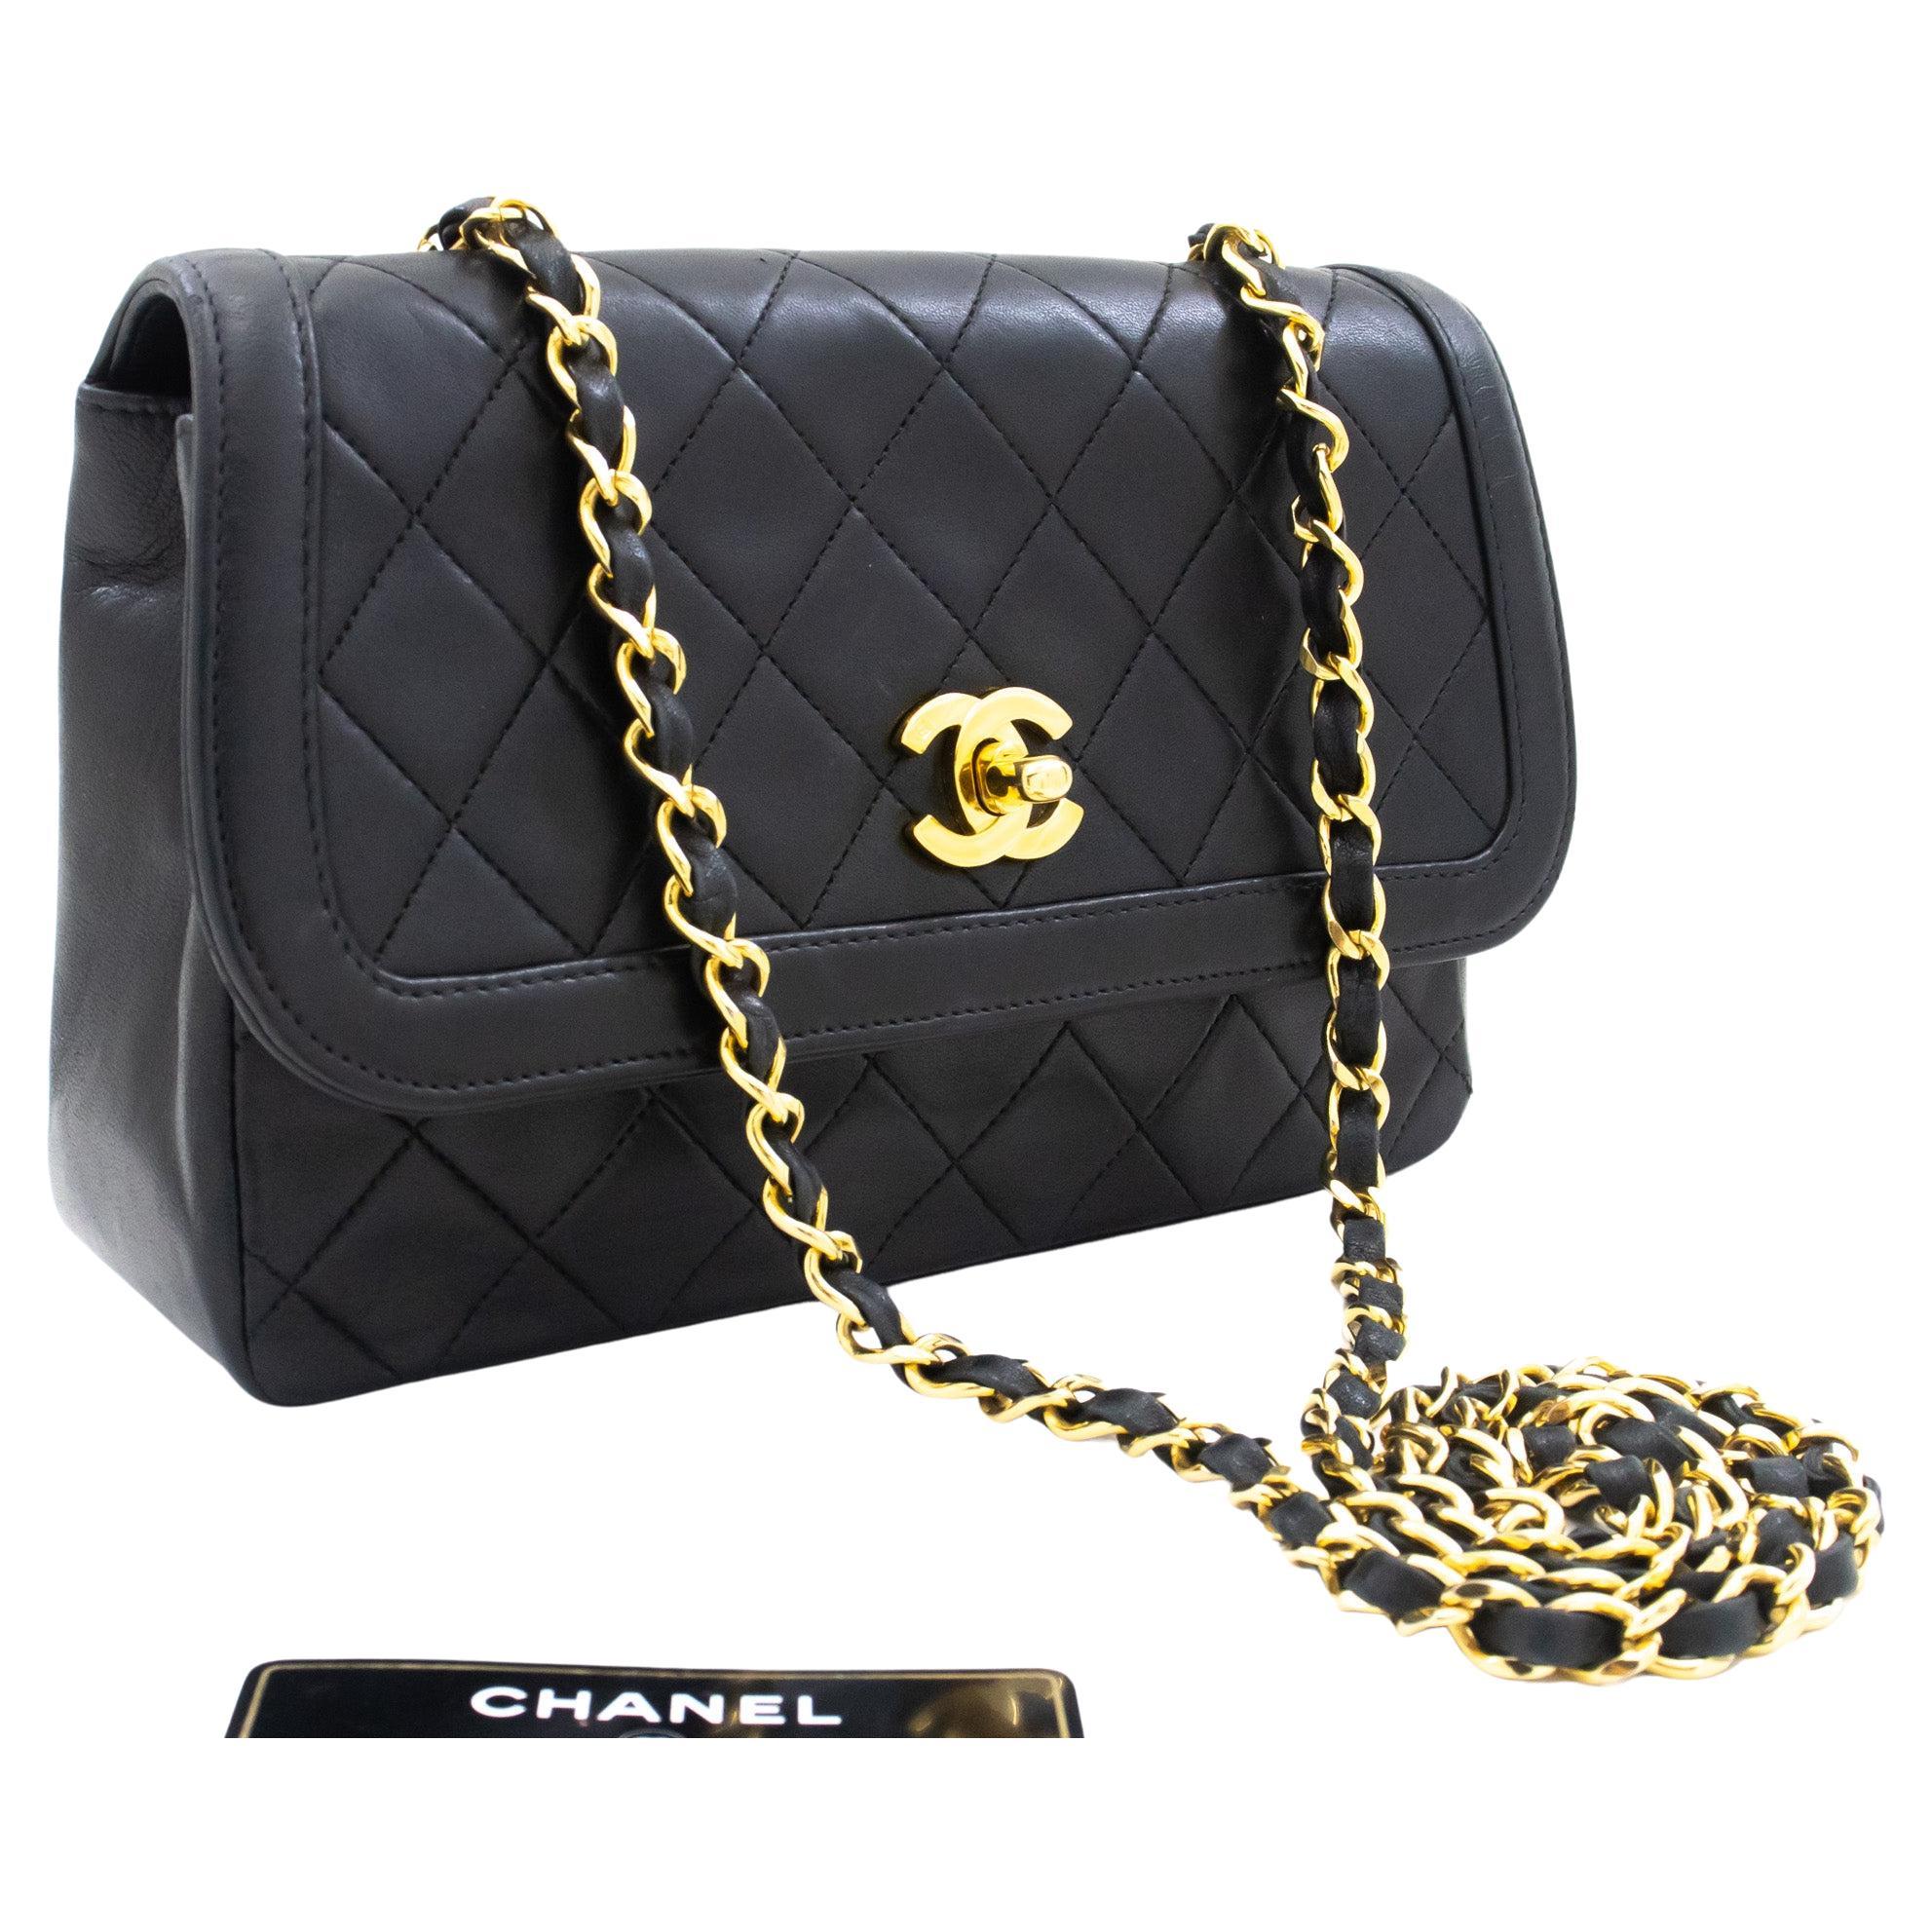 Authentic Chanel Medallion tote in black caviar leather, SHW